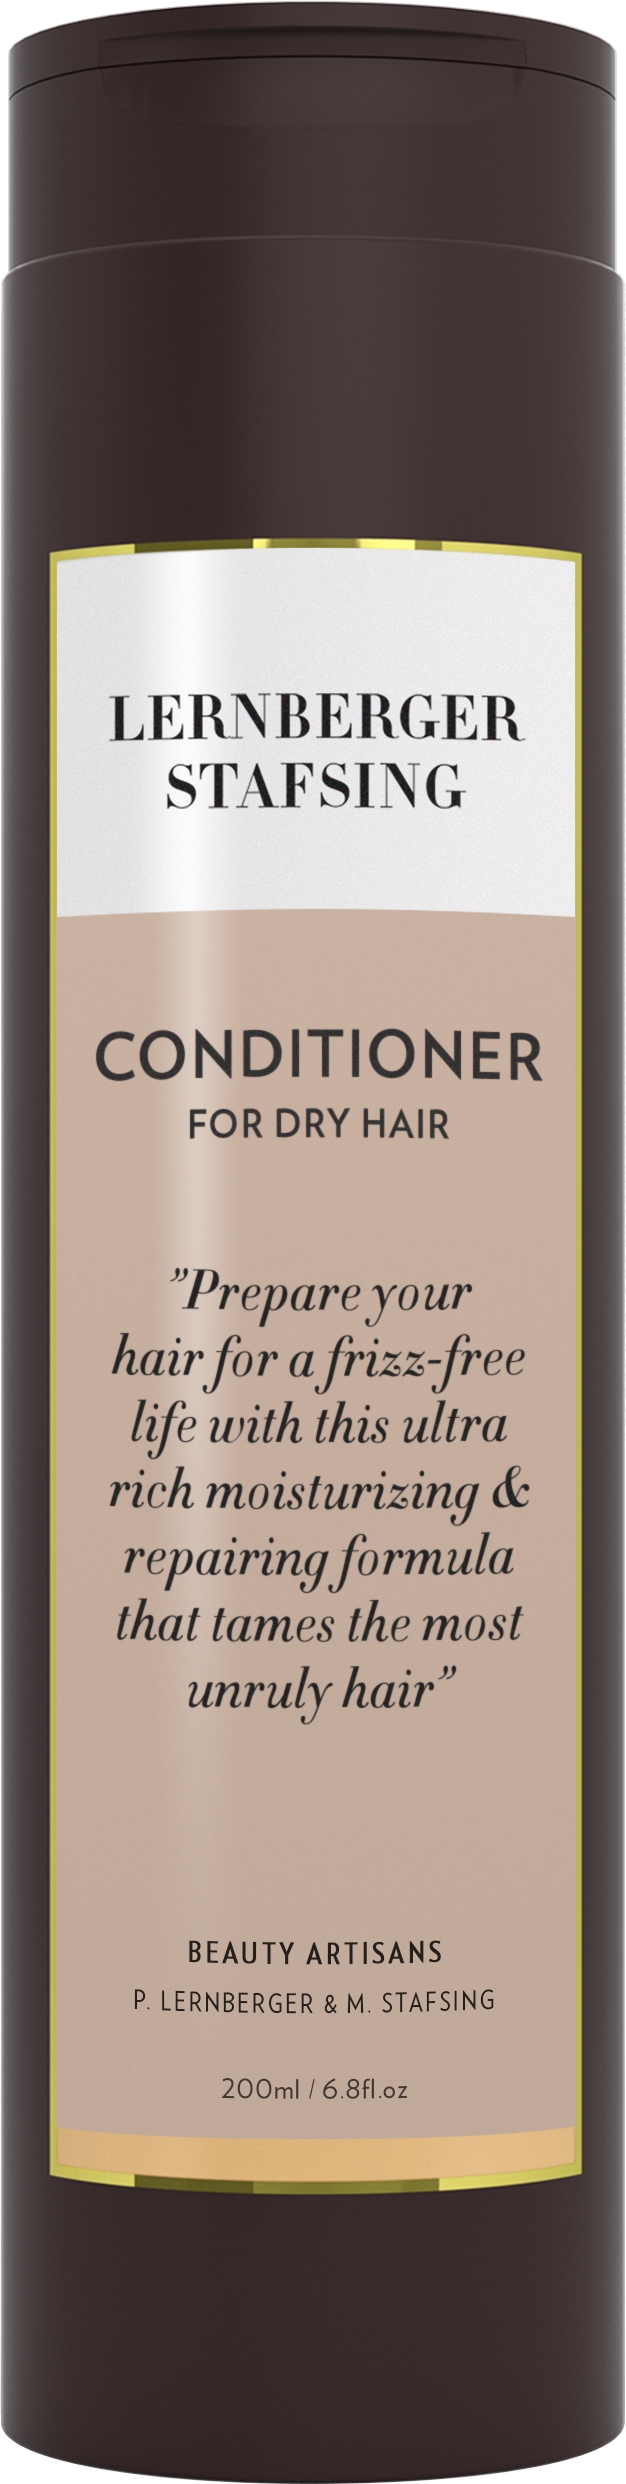 For Dry Hair Conditioner